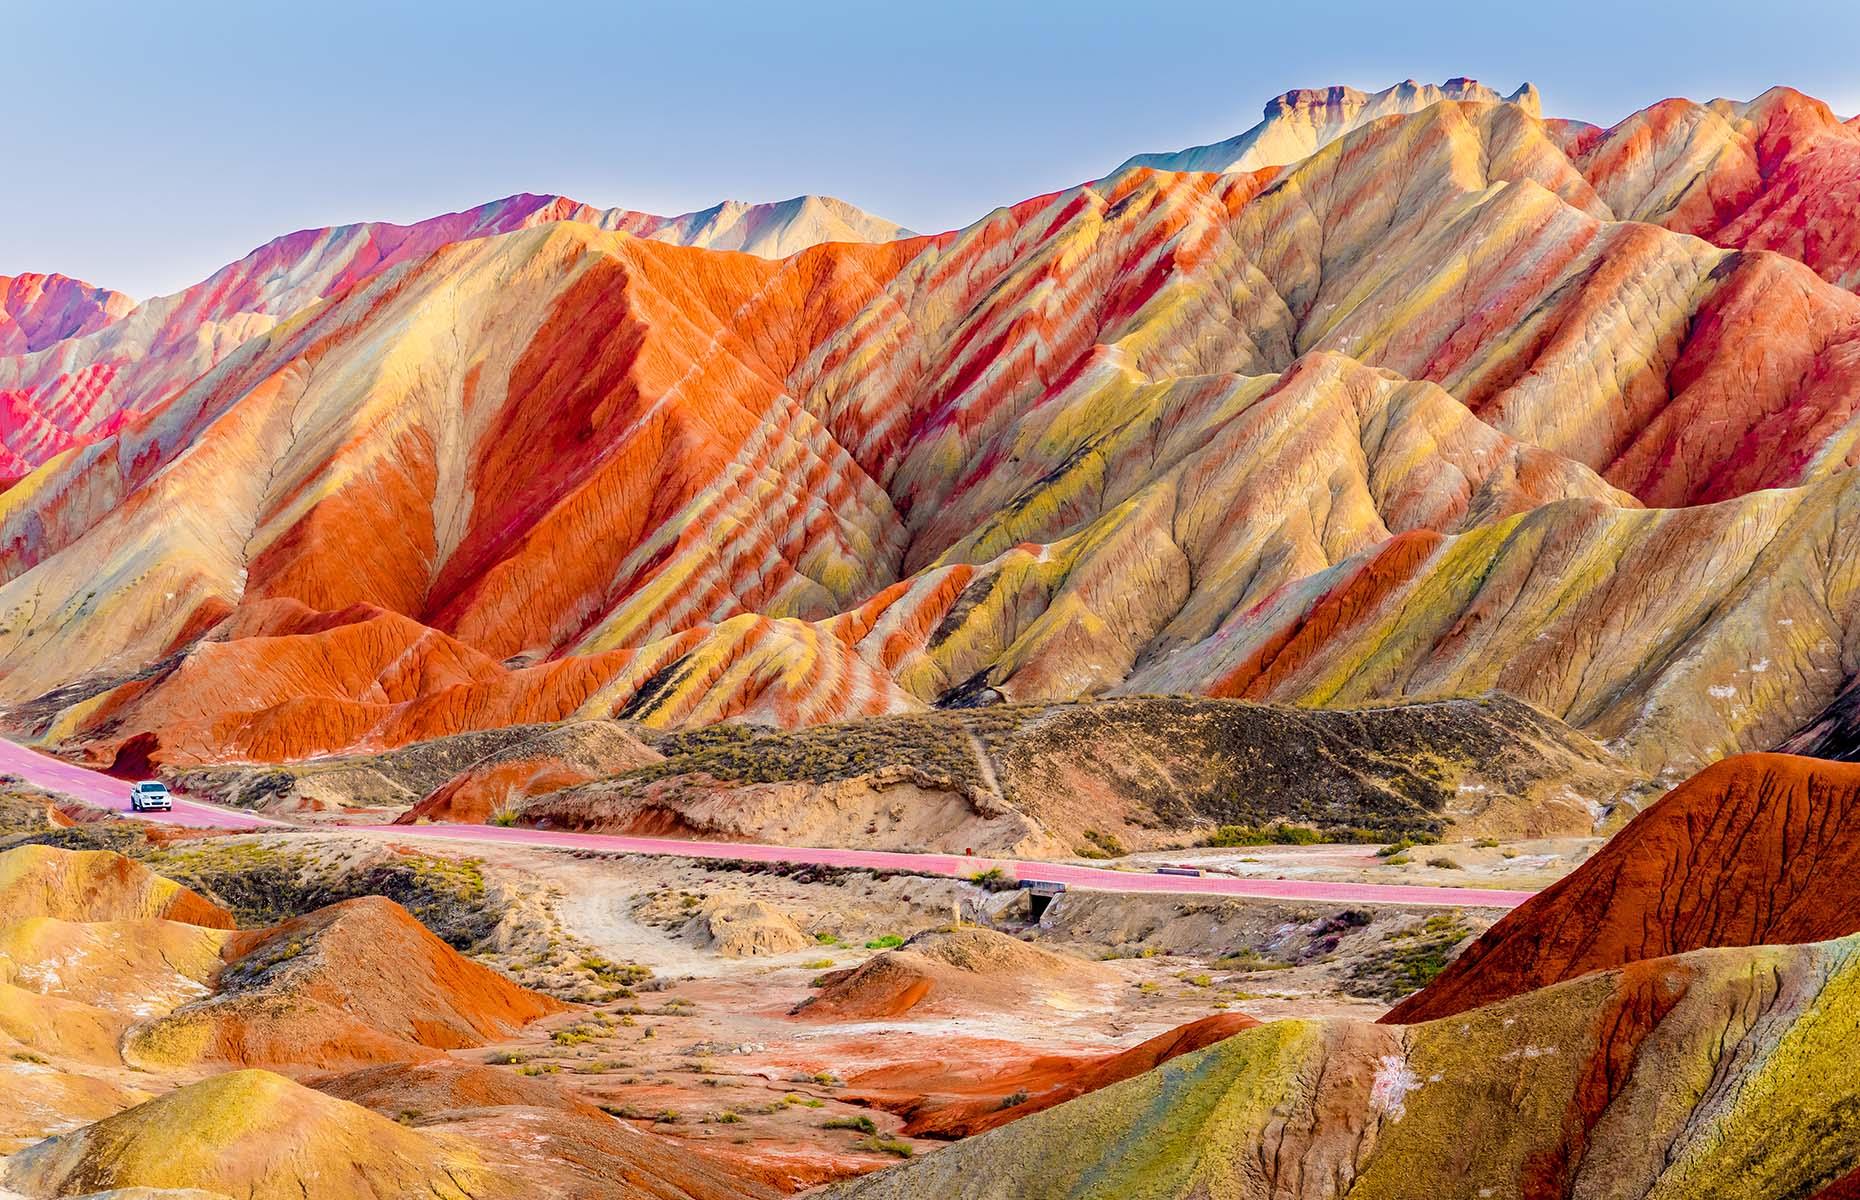 The rainbow-hued mountains in Zhangye National Geopark look just like an artist's paint palette. Part of an UNESCO World Heritage Site, this stunning formation was created by natural erosion, when layers of sand, silt, iron and minerals blended together to create a kaleidoscope of colors. The incredible park appears to have been decorated by Mother Nature herself.